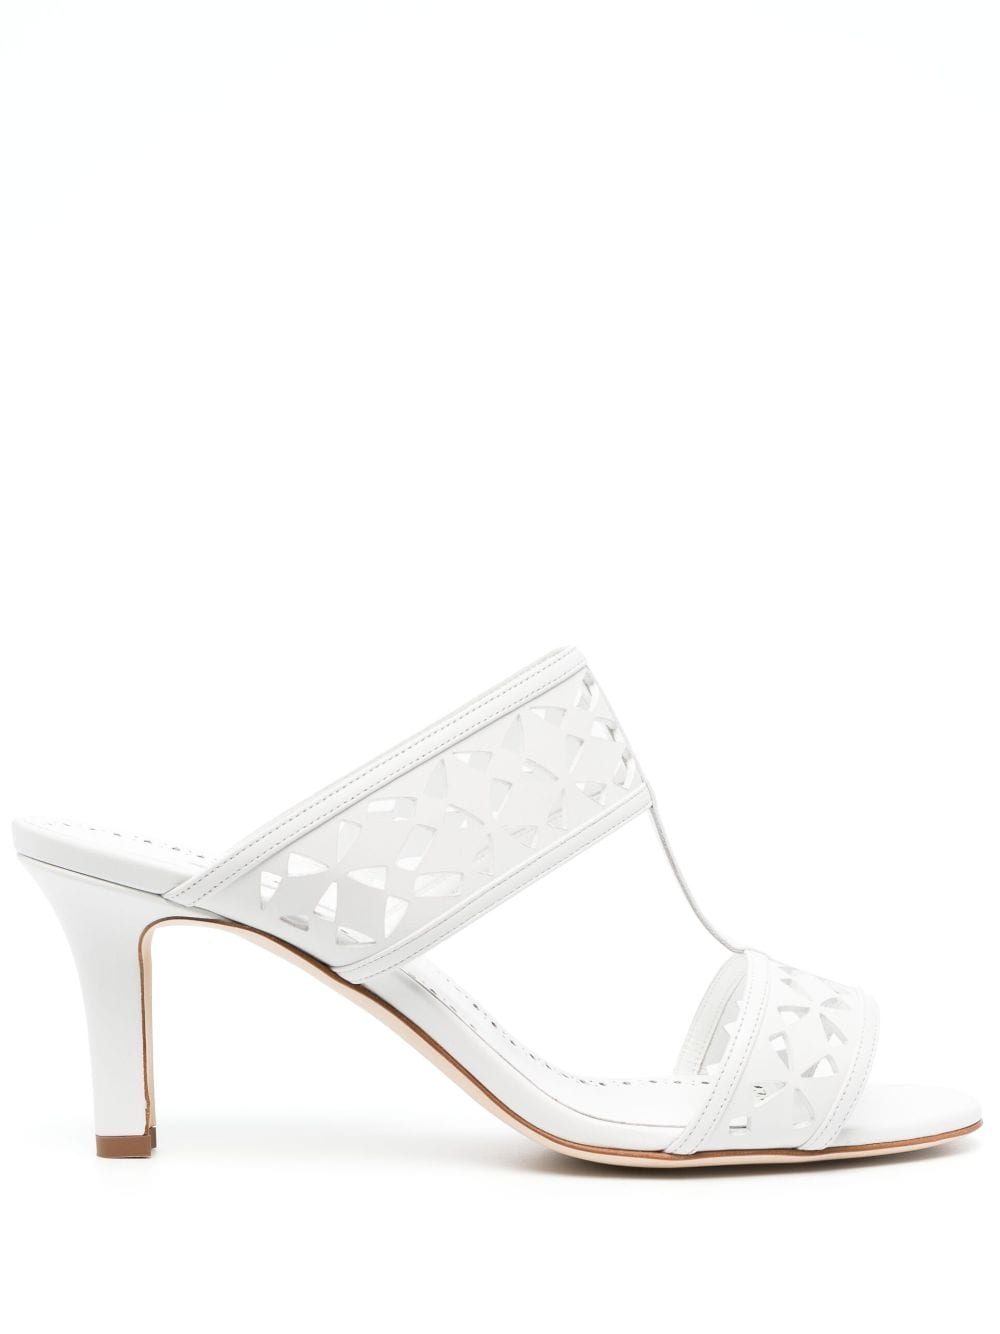 Manolo Blahnik Sophocles 70mm leather sandals - White